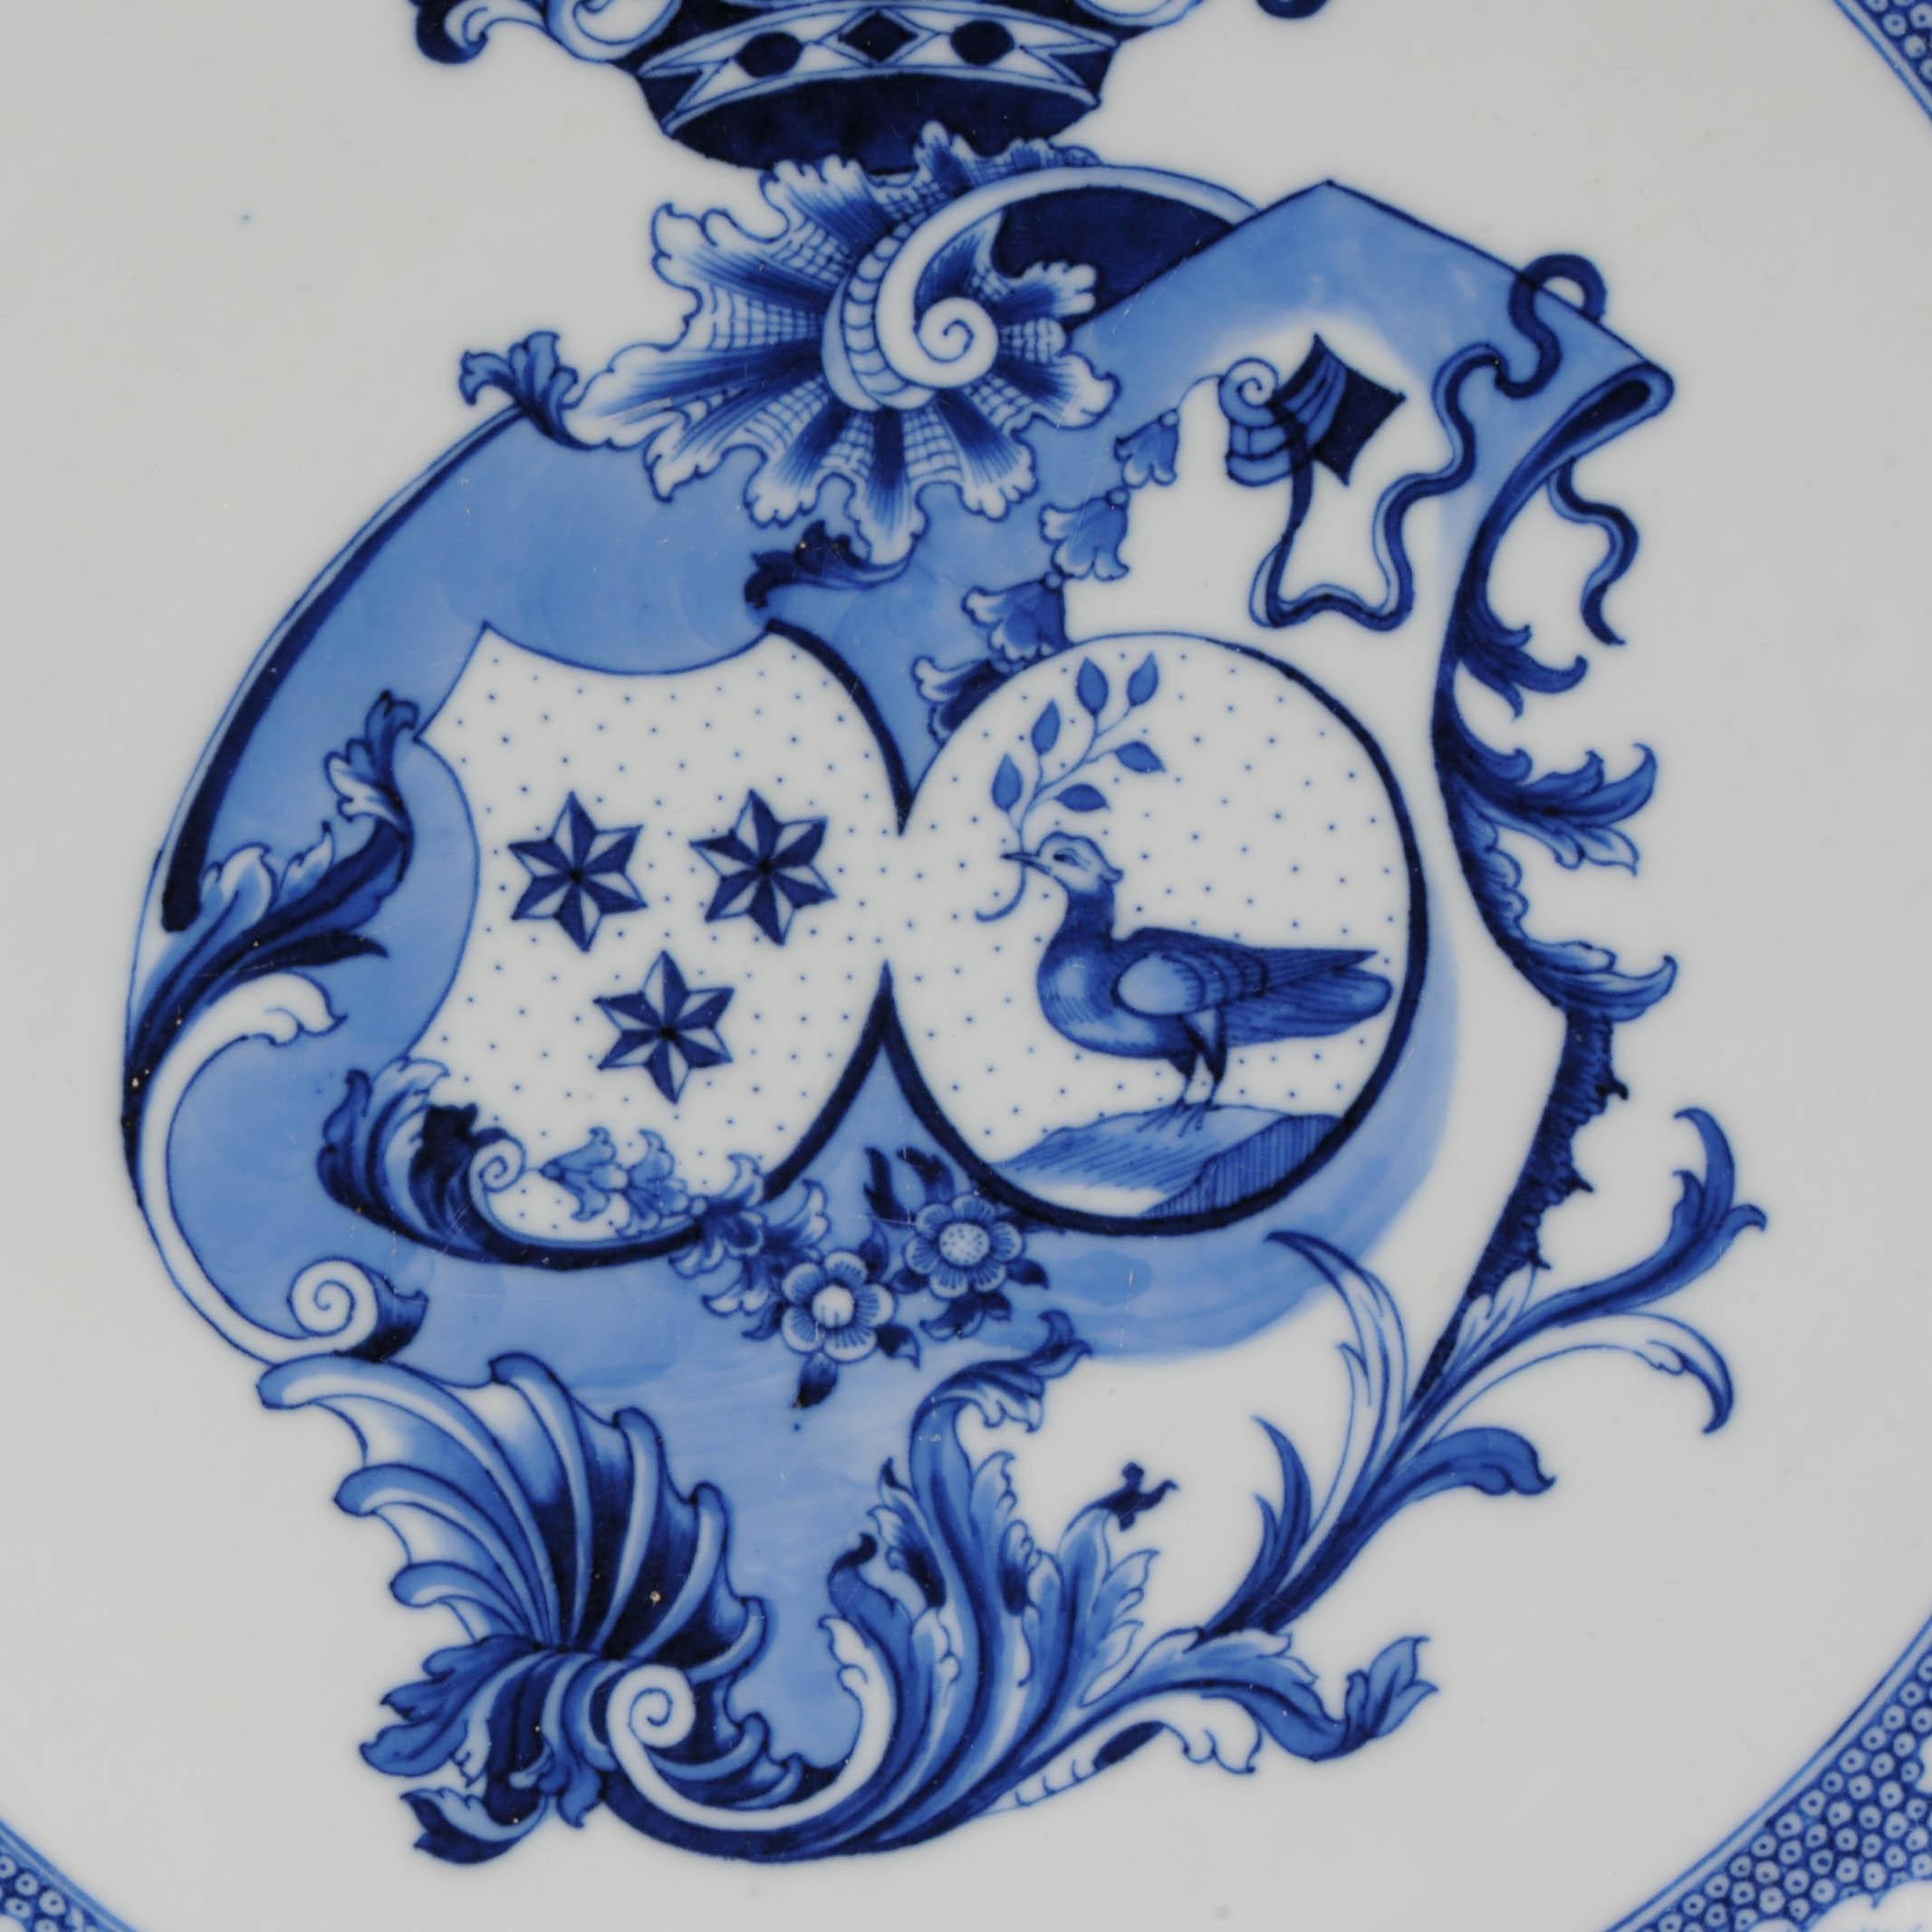 Rare Antique Chinese Porcelain Charger Armorial Arms Gallart Marchant  In Excellent Condition For Sale In Amsterdam, Noord Holland